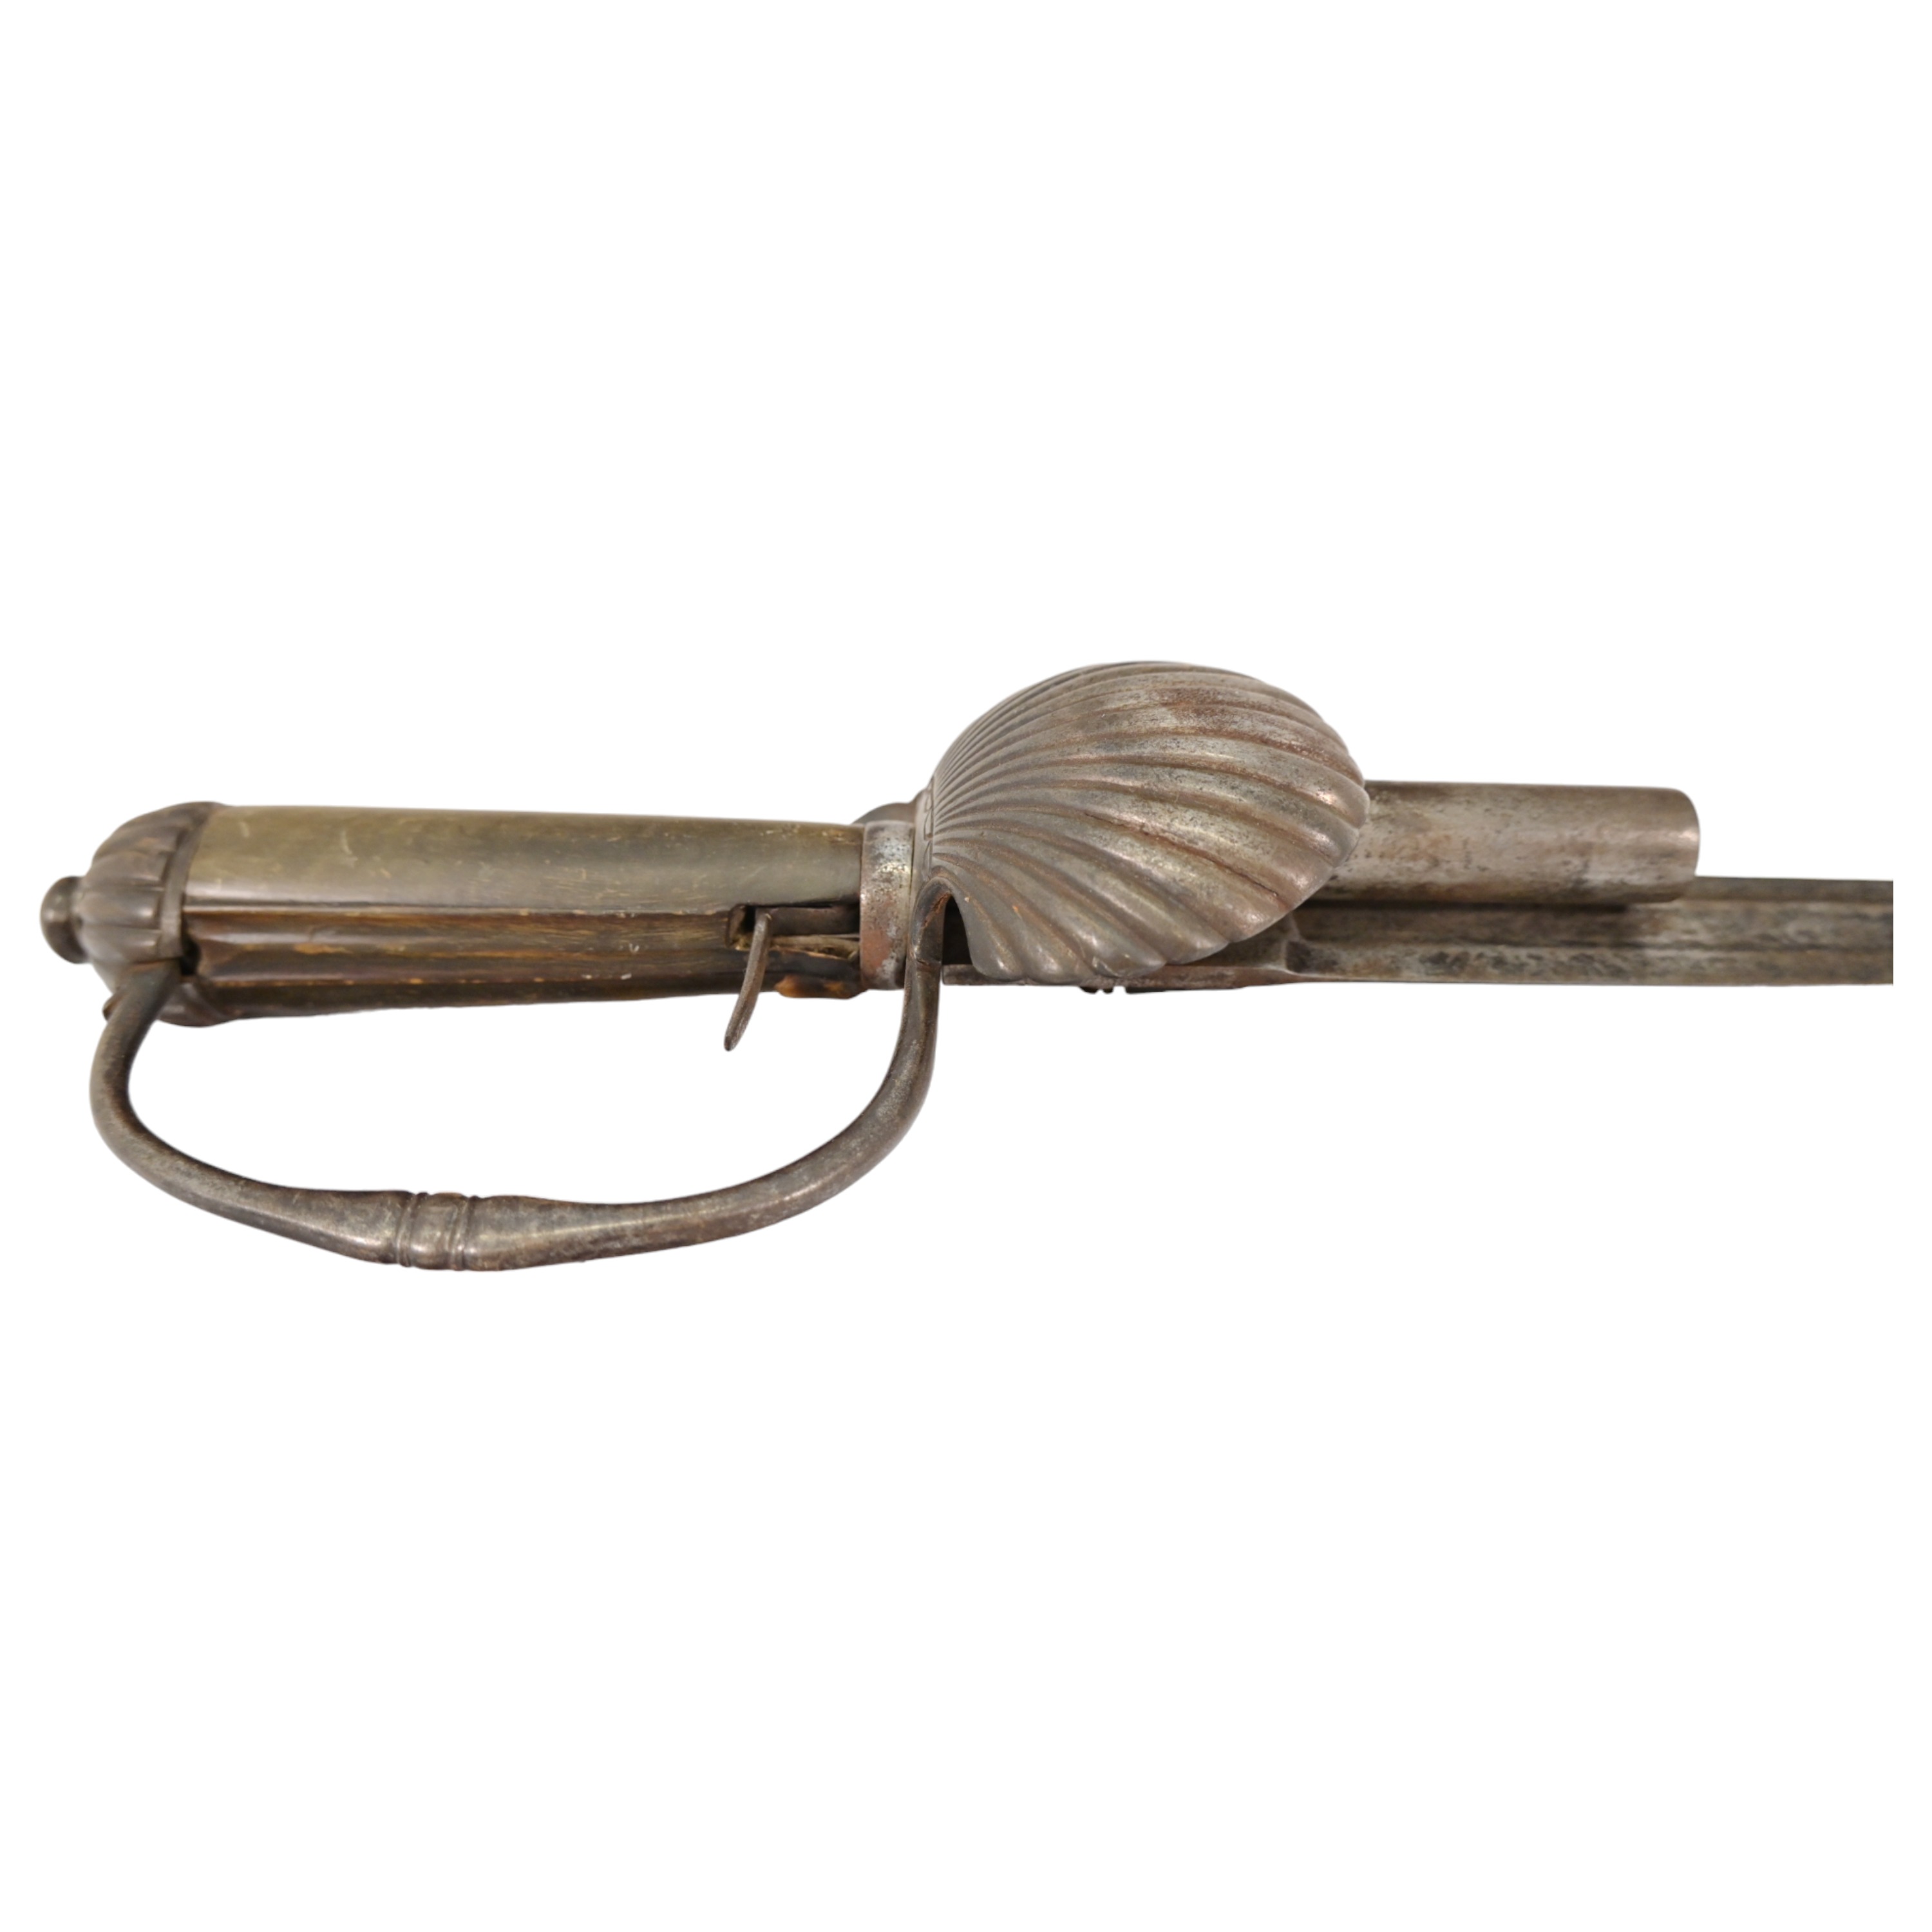 A FLINT LOCK HUNTING SWORD PISTOL WITH SHELL GUARD, IN THE ENGLISH TASTE, LAST HALF 18TH CENTURY. - Image 8 of 13